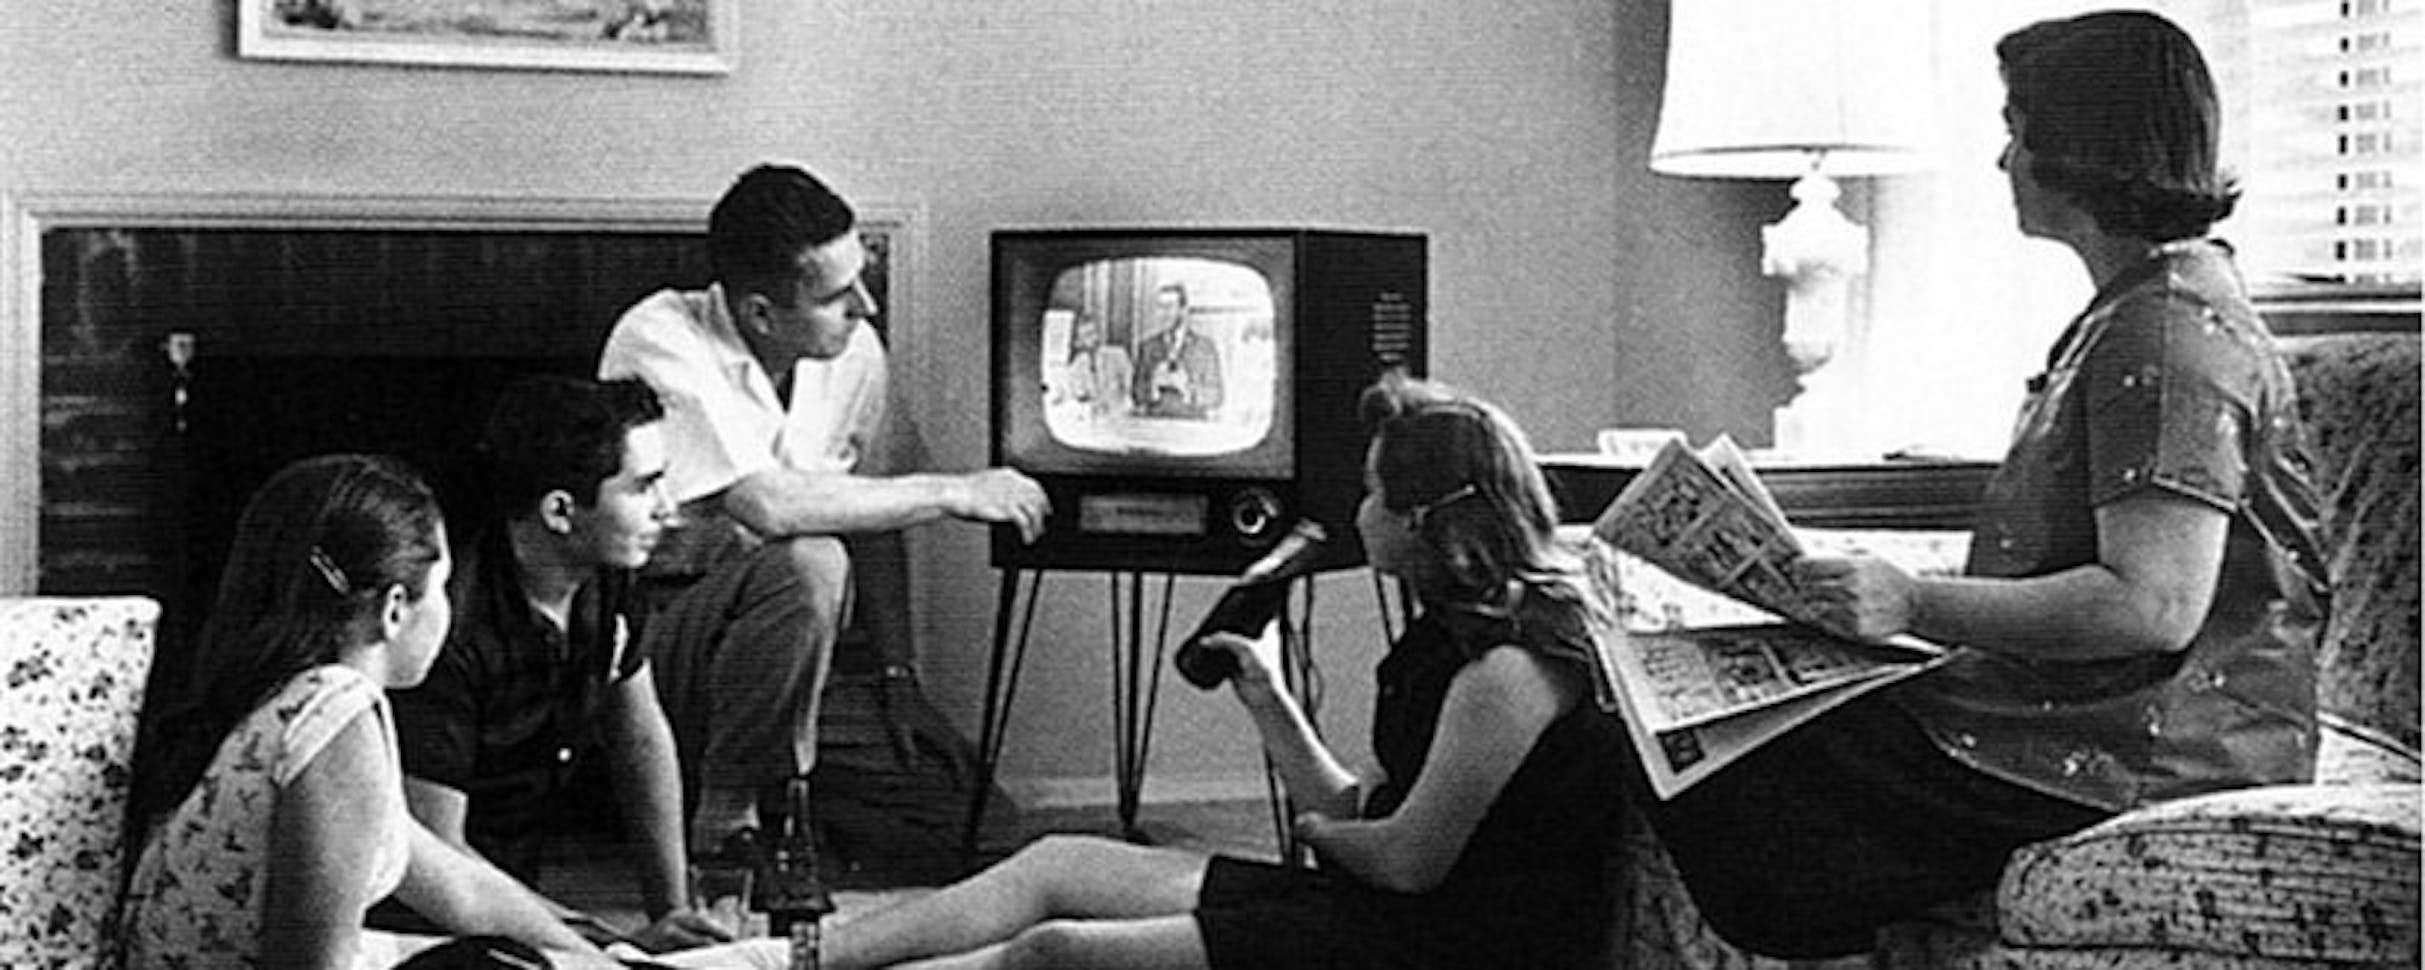 Photo of a family gathered around an old black and white television set. 